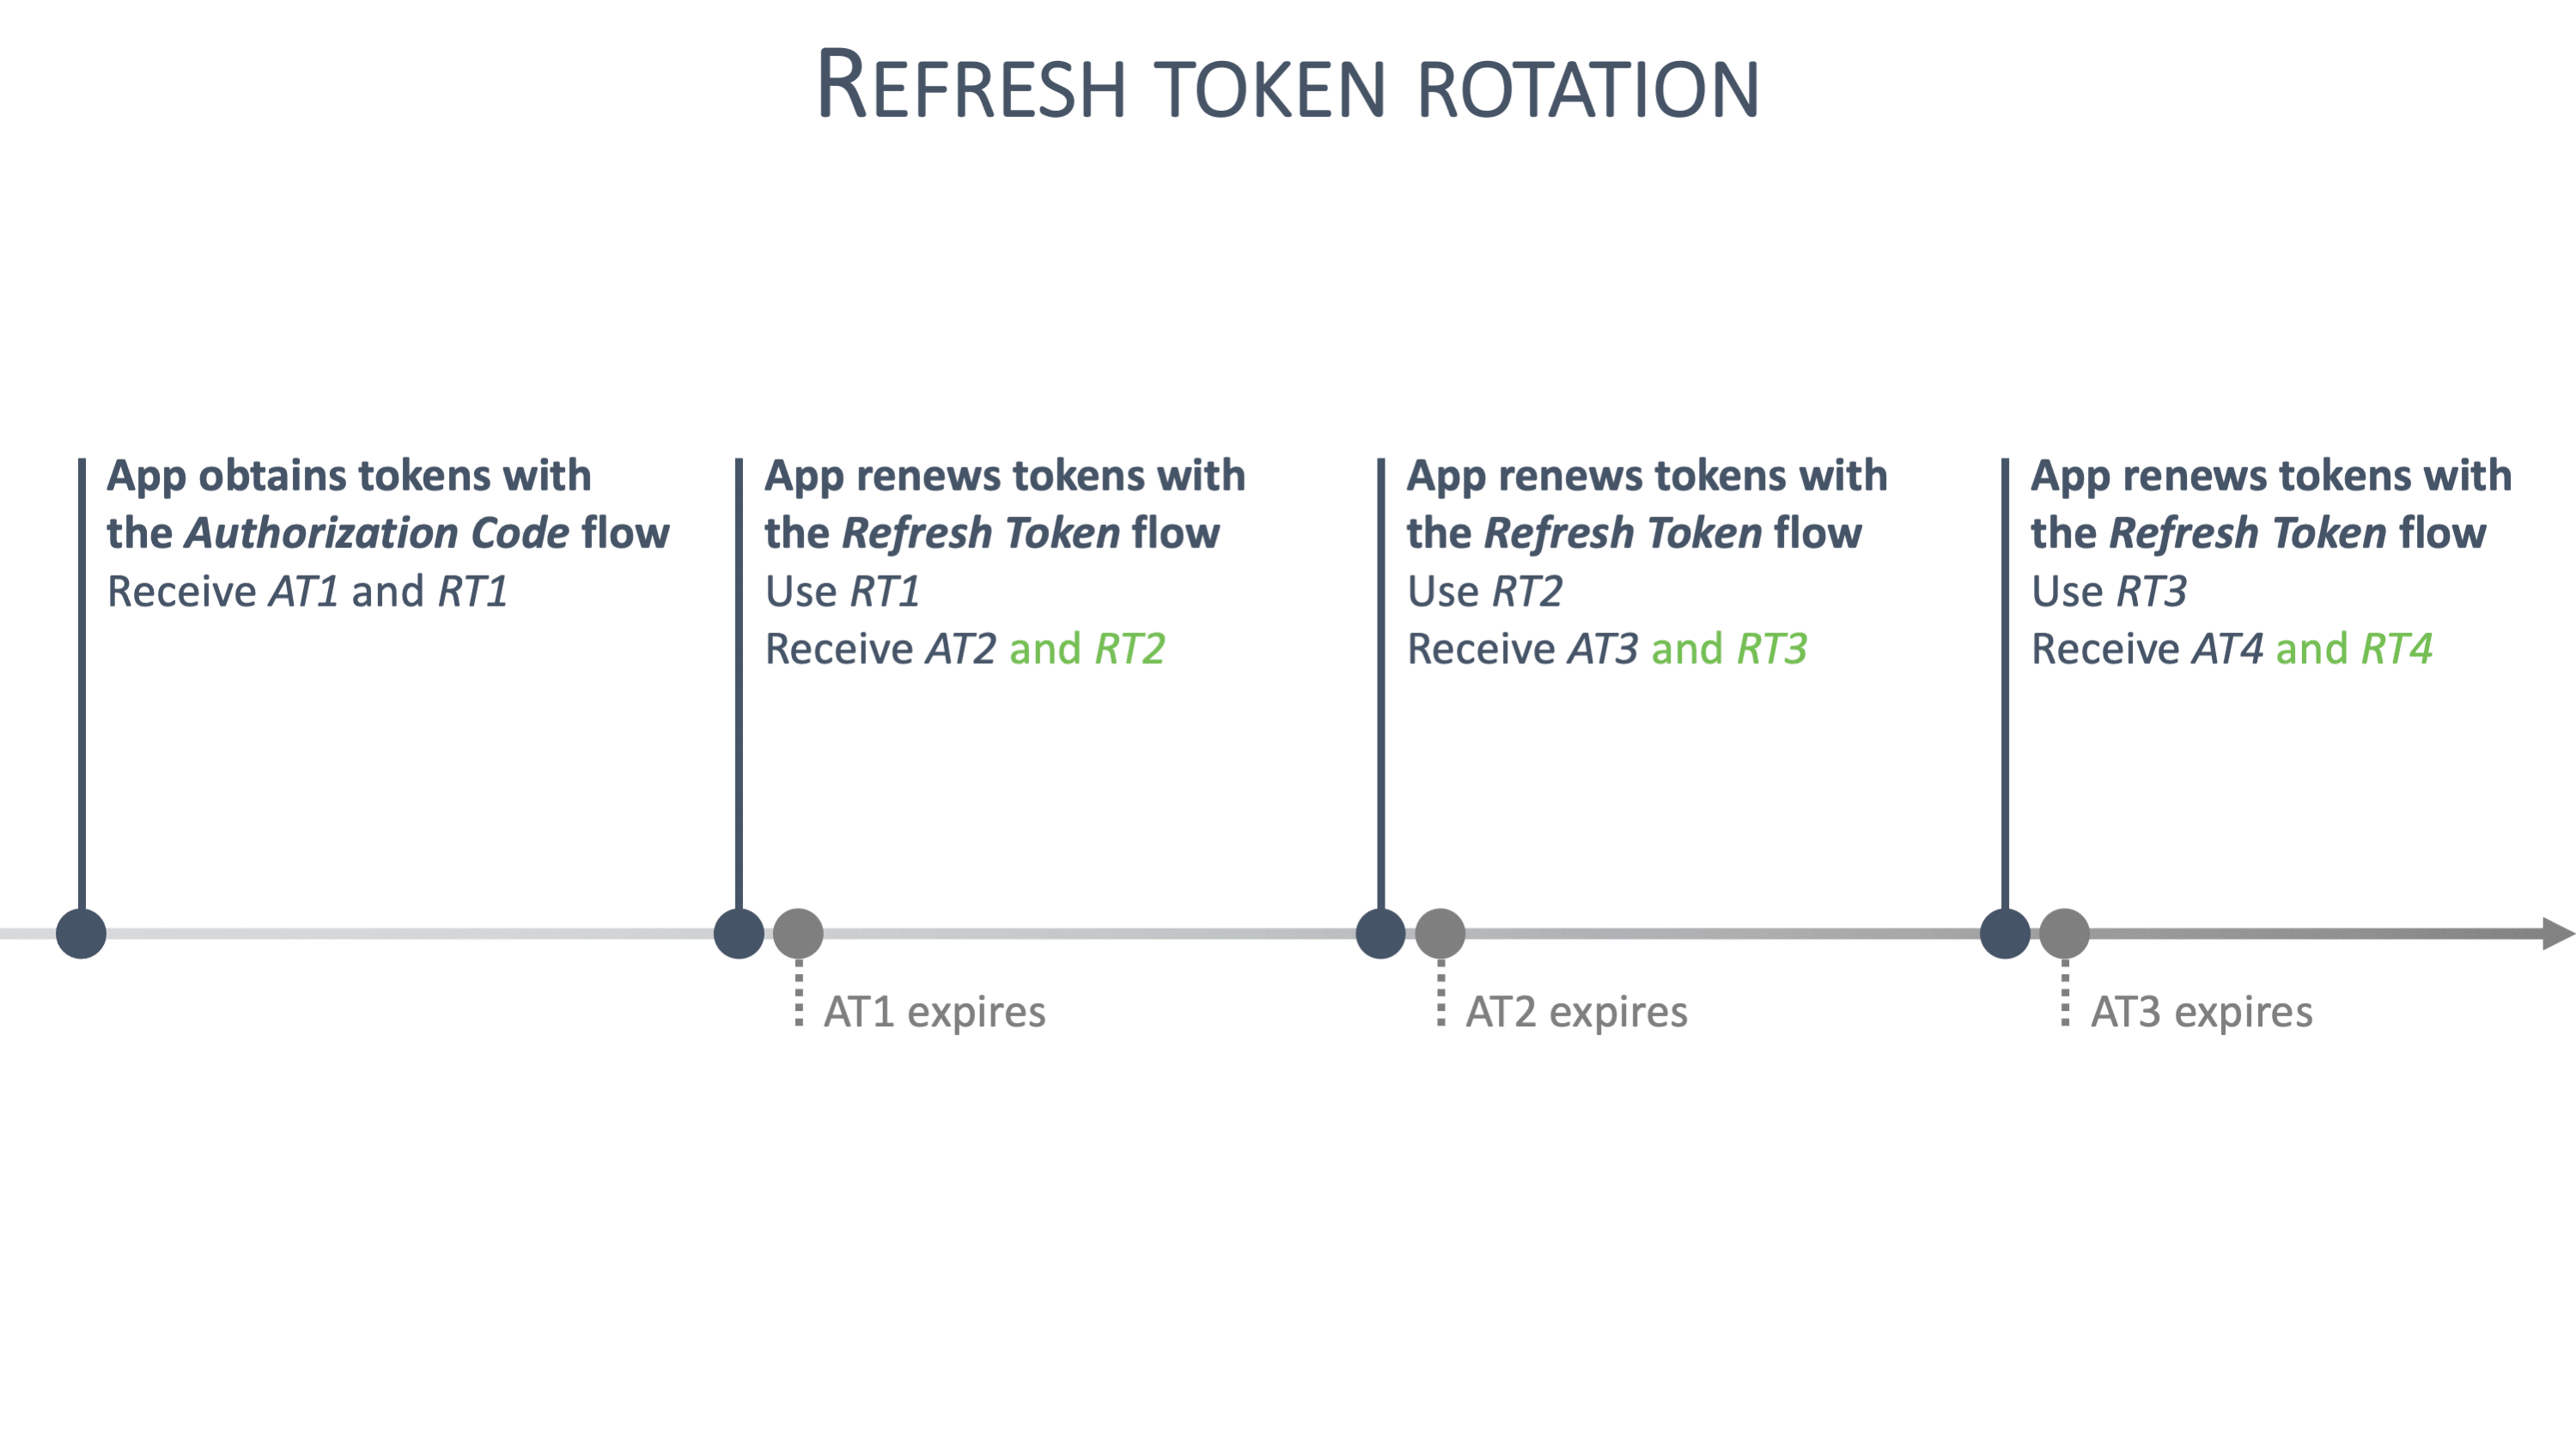 Diagram showing how refresh token rotation works.